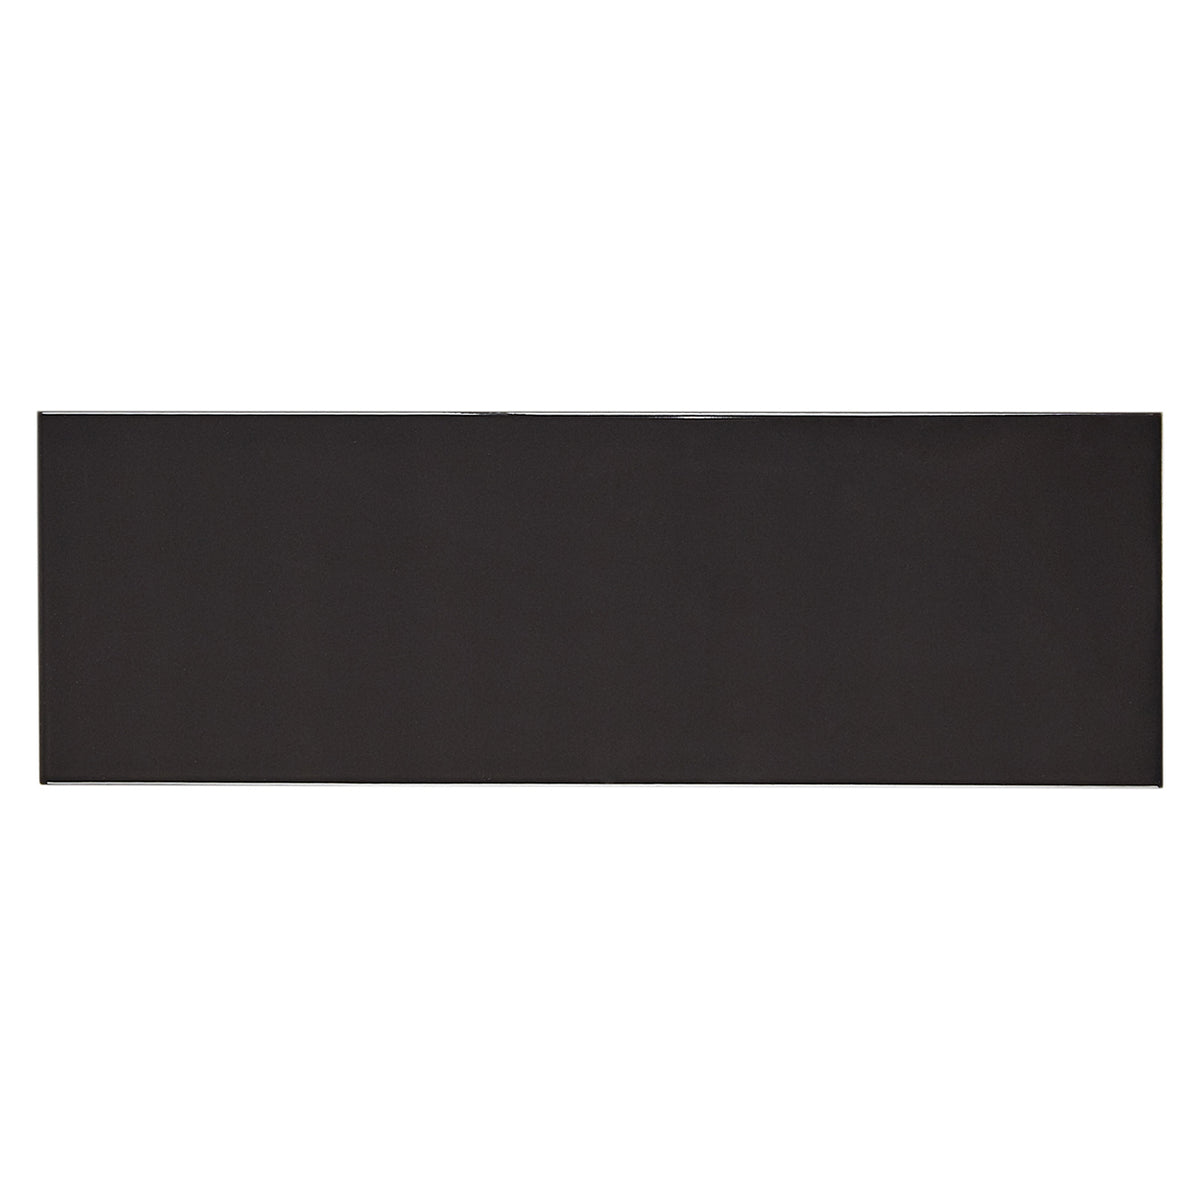 CommodiTile - Carrollton 4 in. x 12 in. Wall Tile - Charcoal Gloss